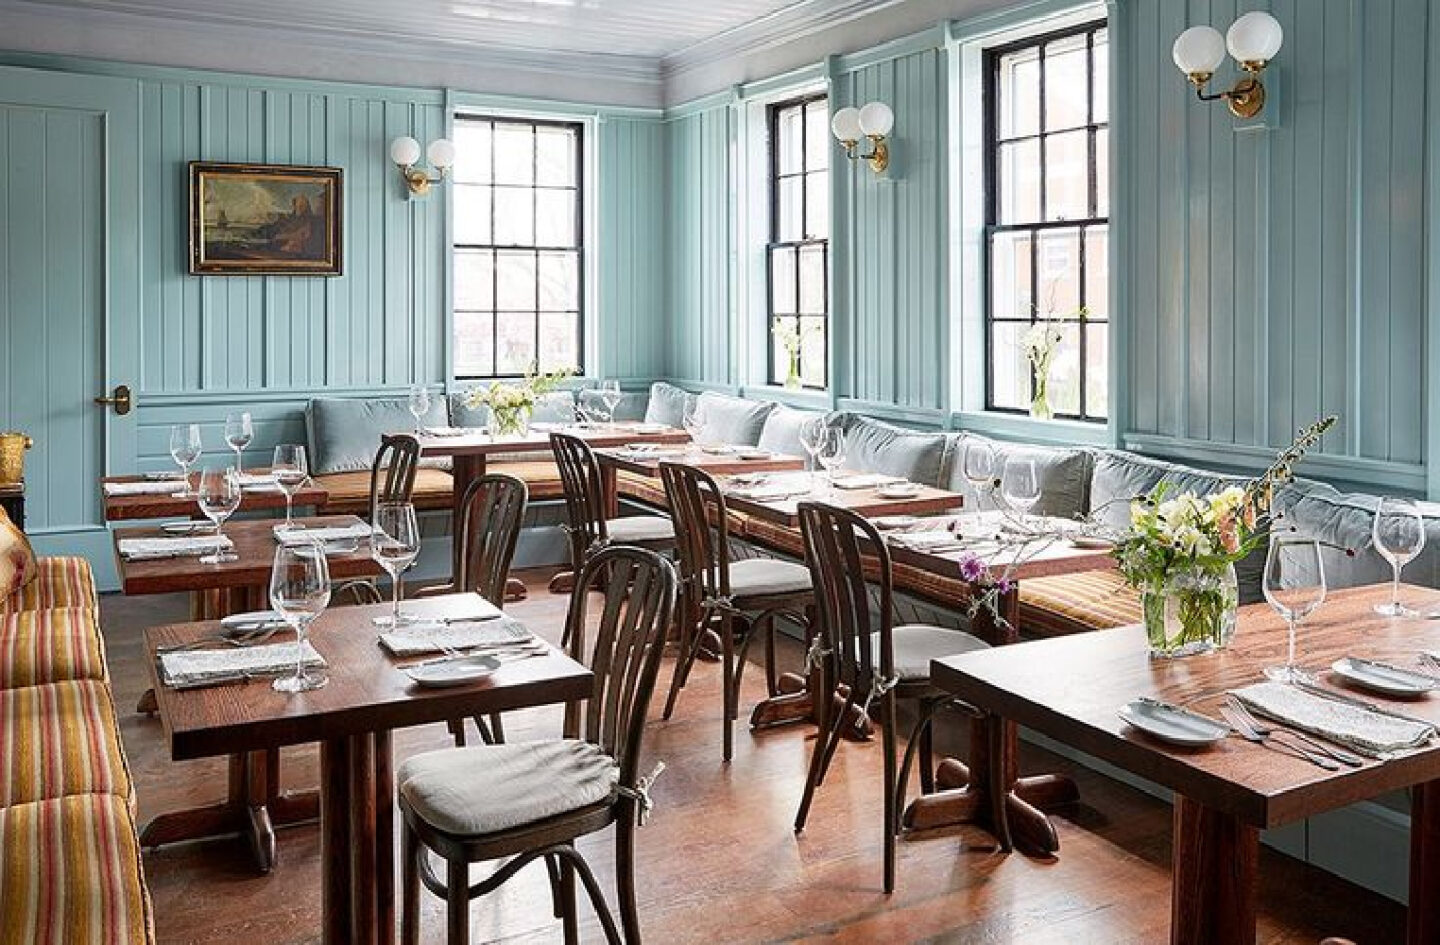 The dining room’s sea-blue walls lend it a modern New England tavern feel. The menu from executive chef Marcus Gleadow-Ware, an alum of Charlie Palmer’s Michelin-starred Aureole, reflects the same sensibility, incorporating local organic produce from landscape designer Marty McGowan’s Pumpkin Pond Farm.